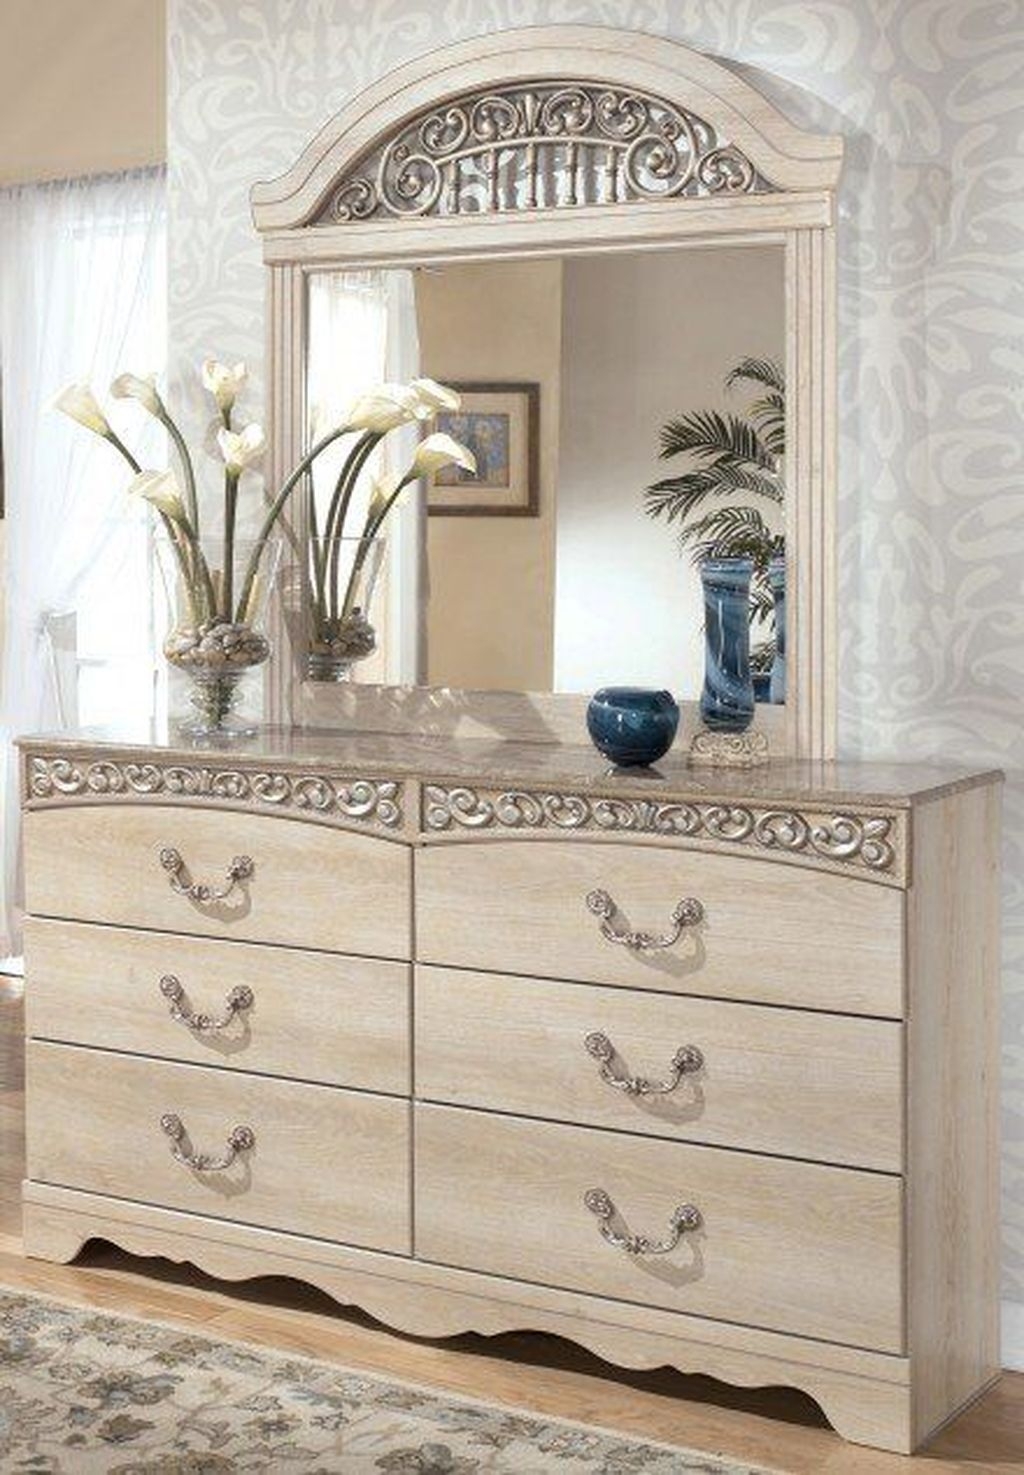 Stylish Bedroom Dressers Ideas With Mirrors That You Need To Try 27